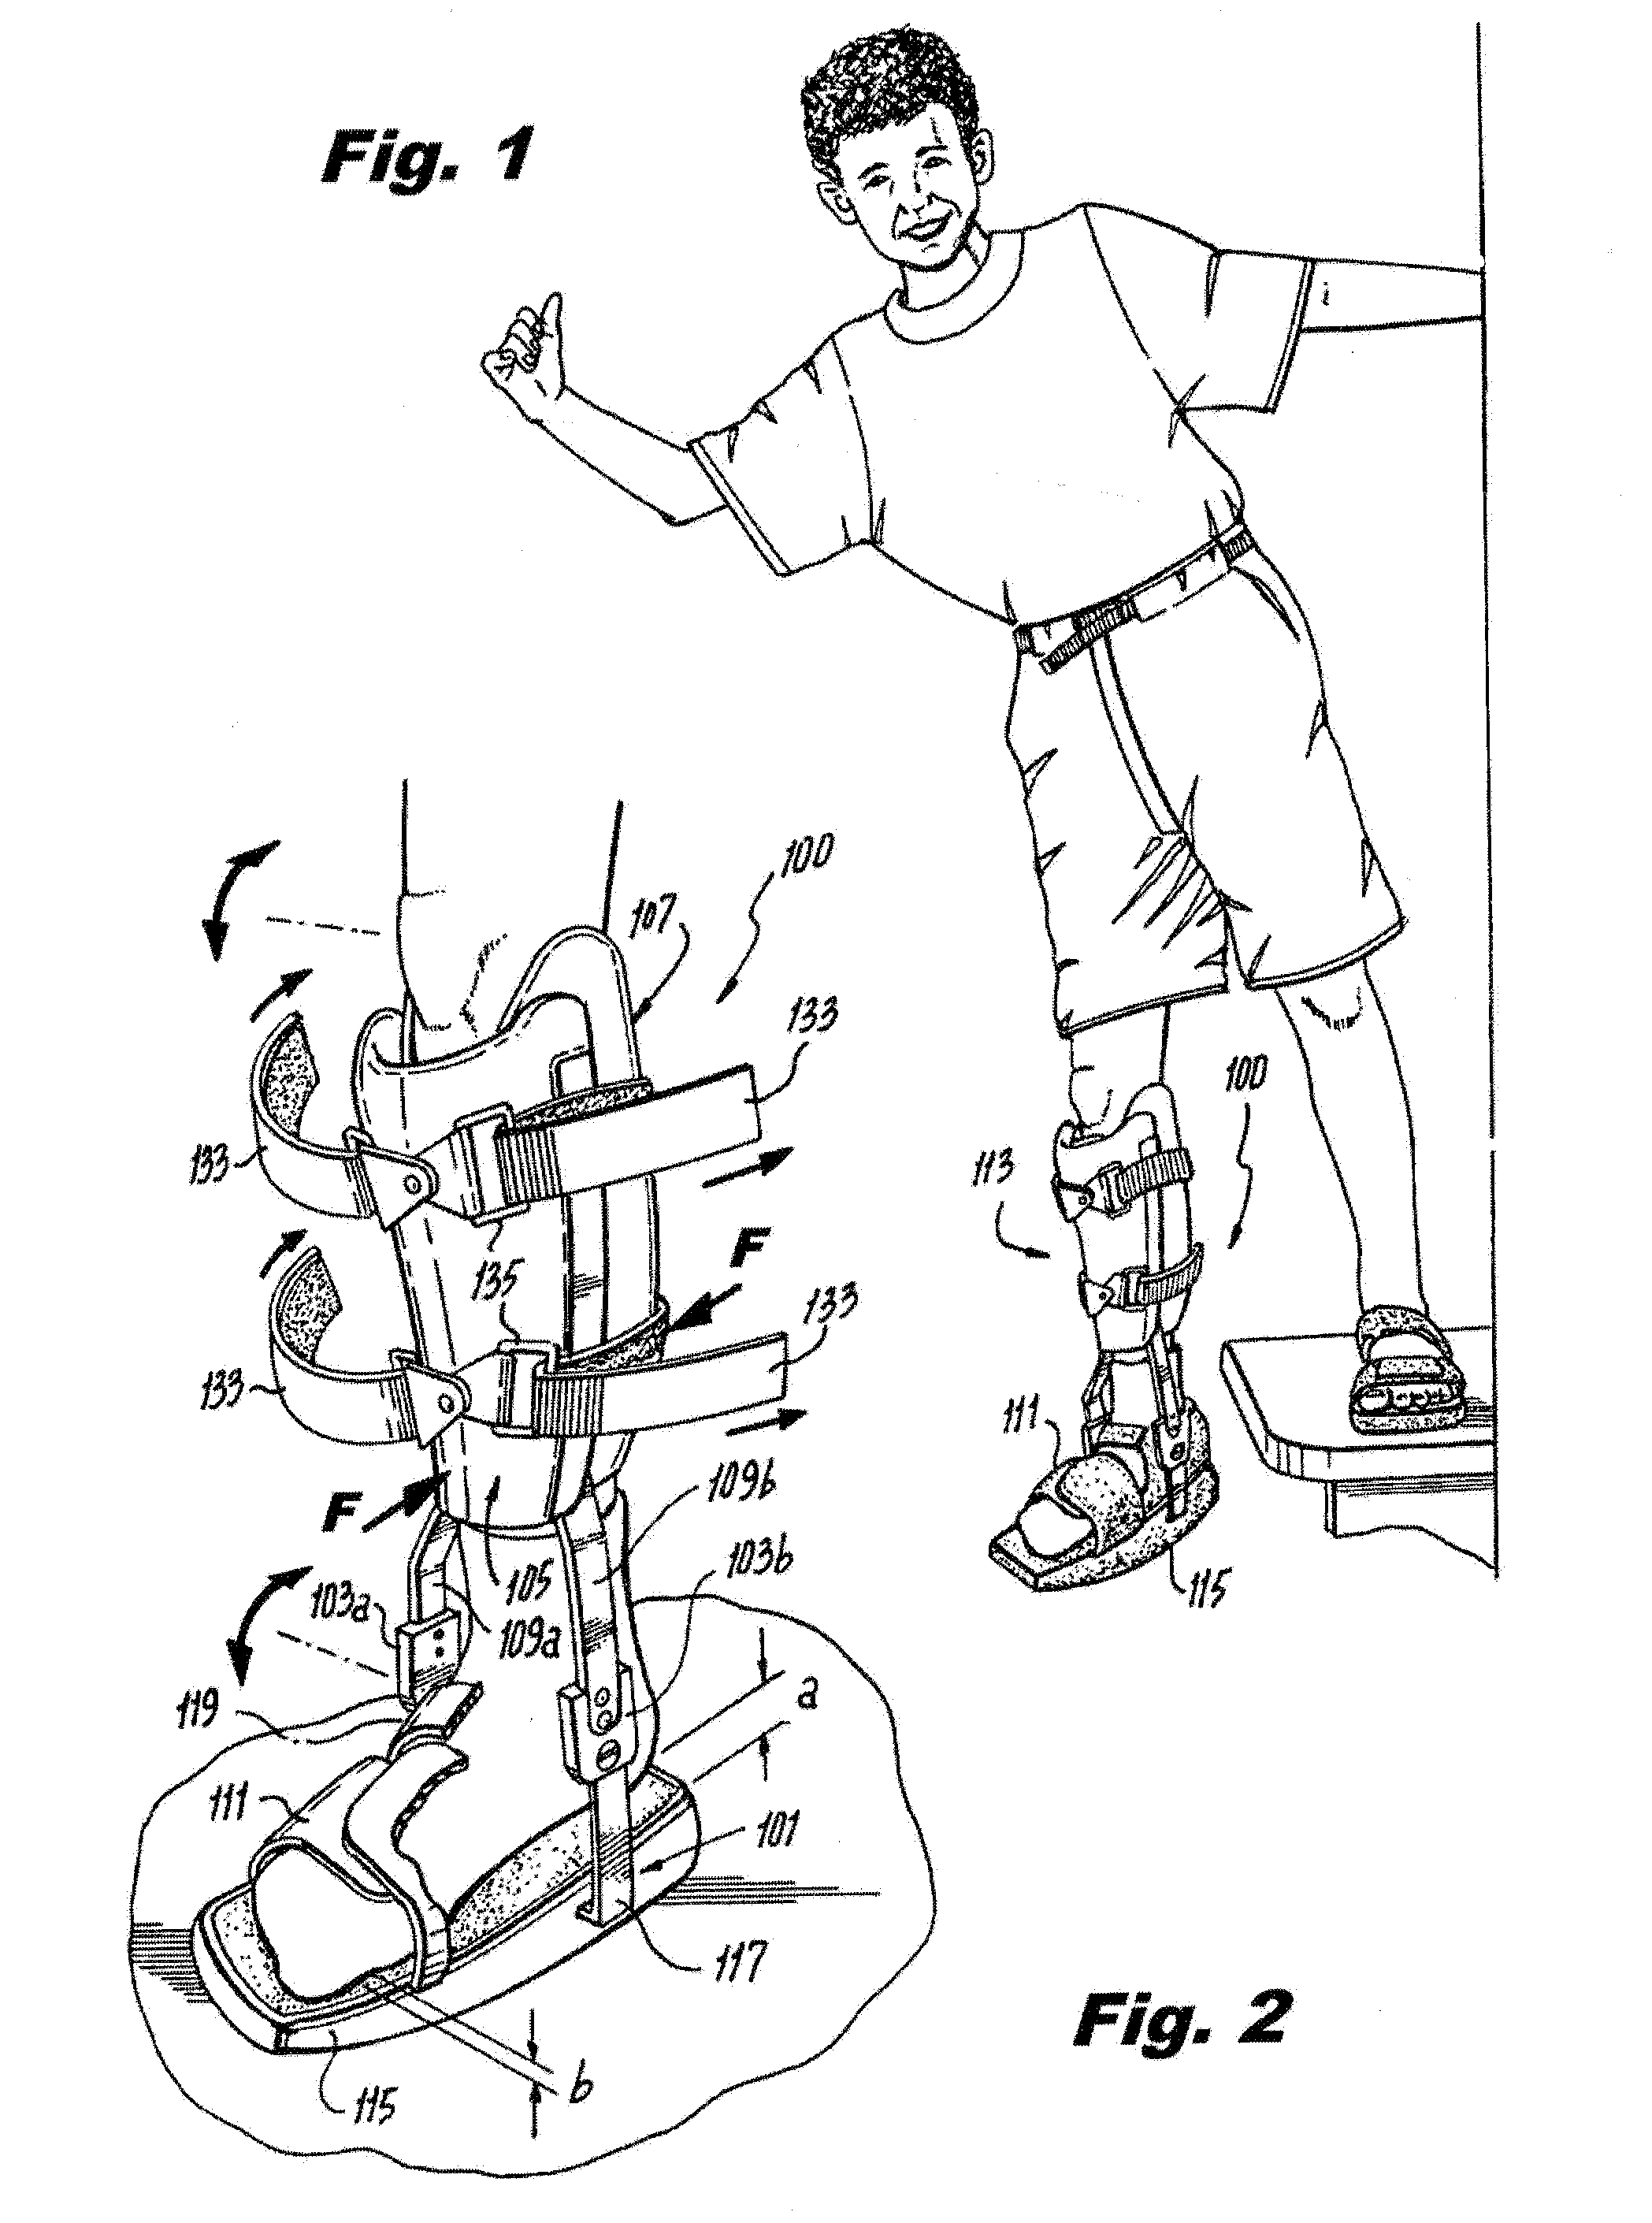 Orthotic Assembly for Selectively off-Loading a Weight-Bearing Joint